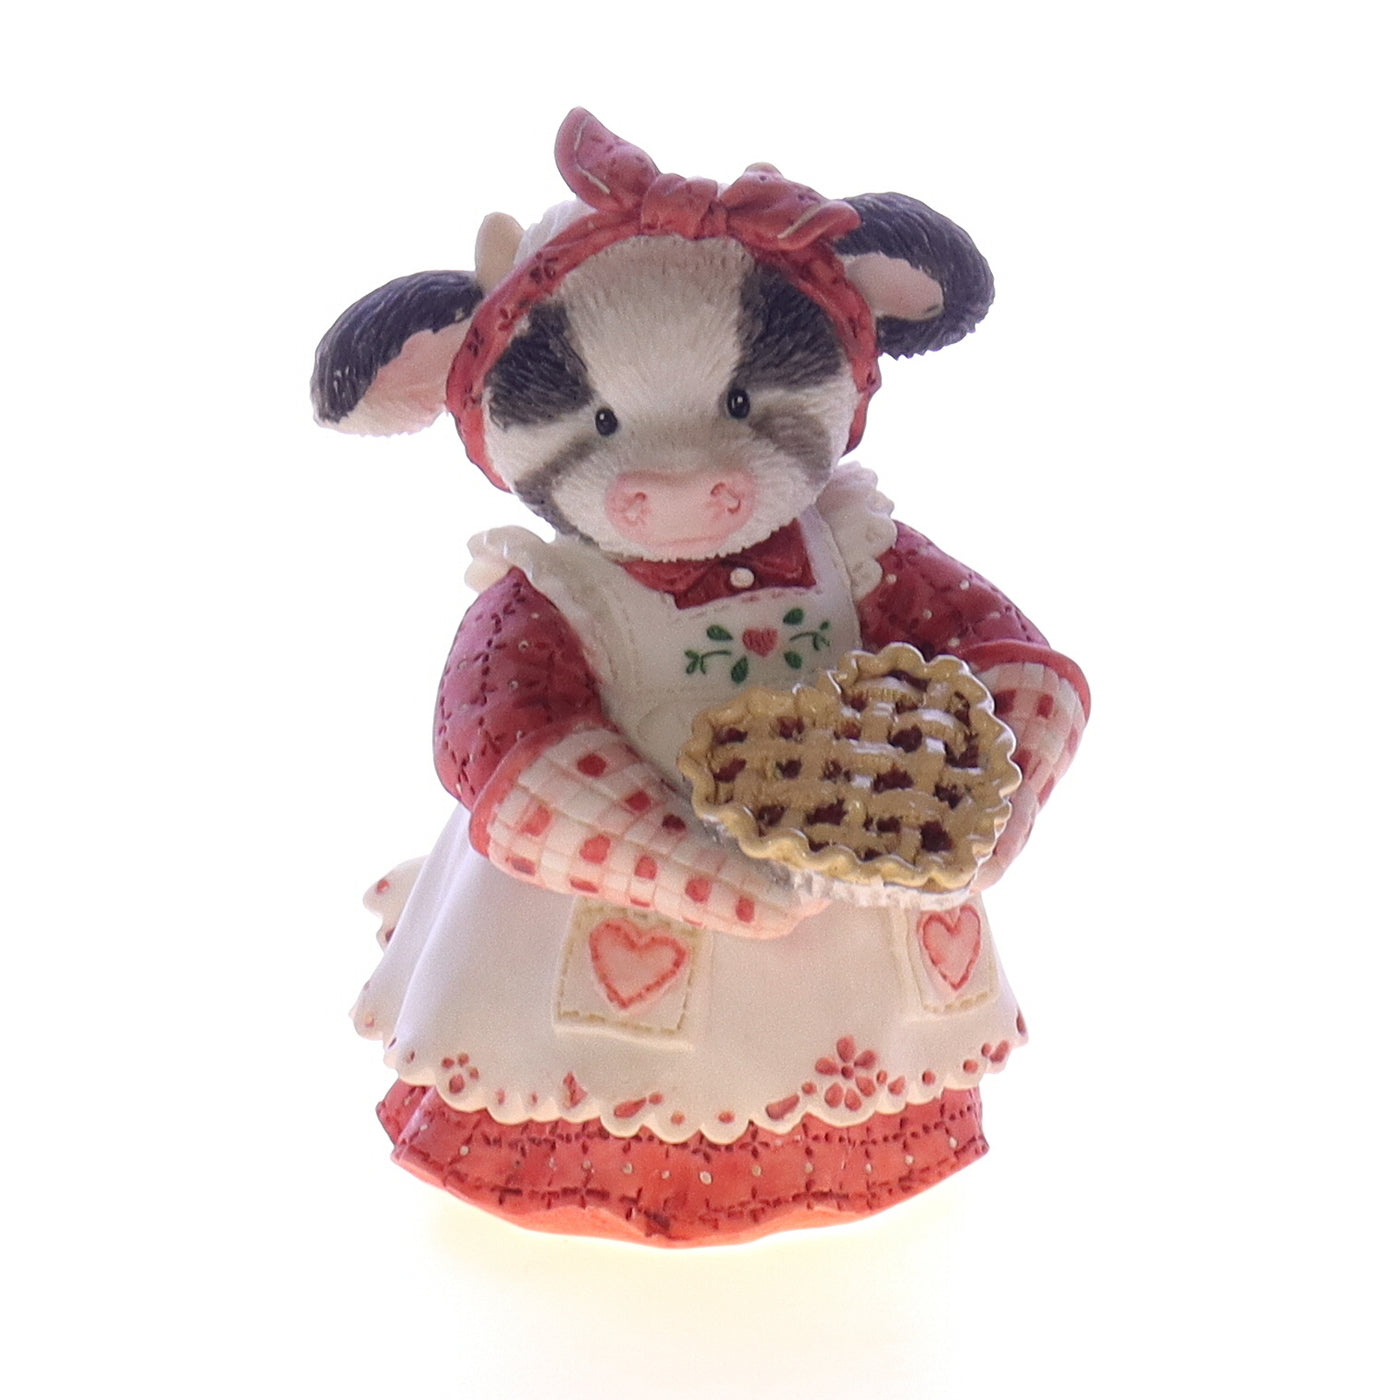 Marys_Moo_Moos_104272_Youre_My_Sweetie_Pie_Valentines_Day_Figurine_1994_Box Front View